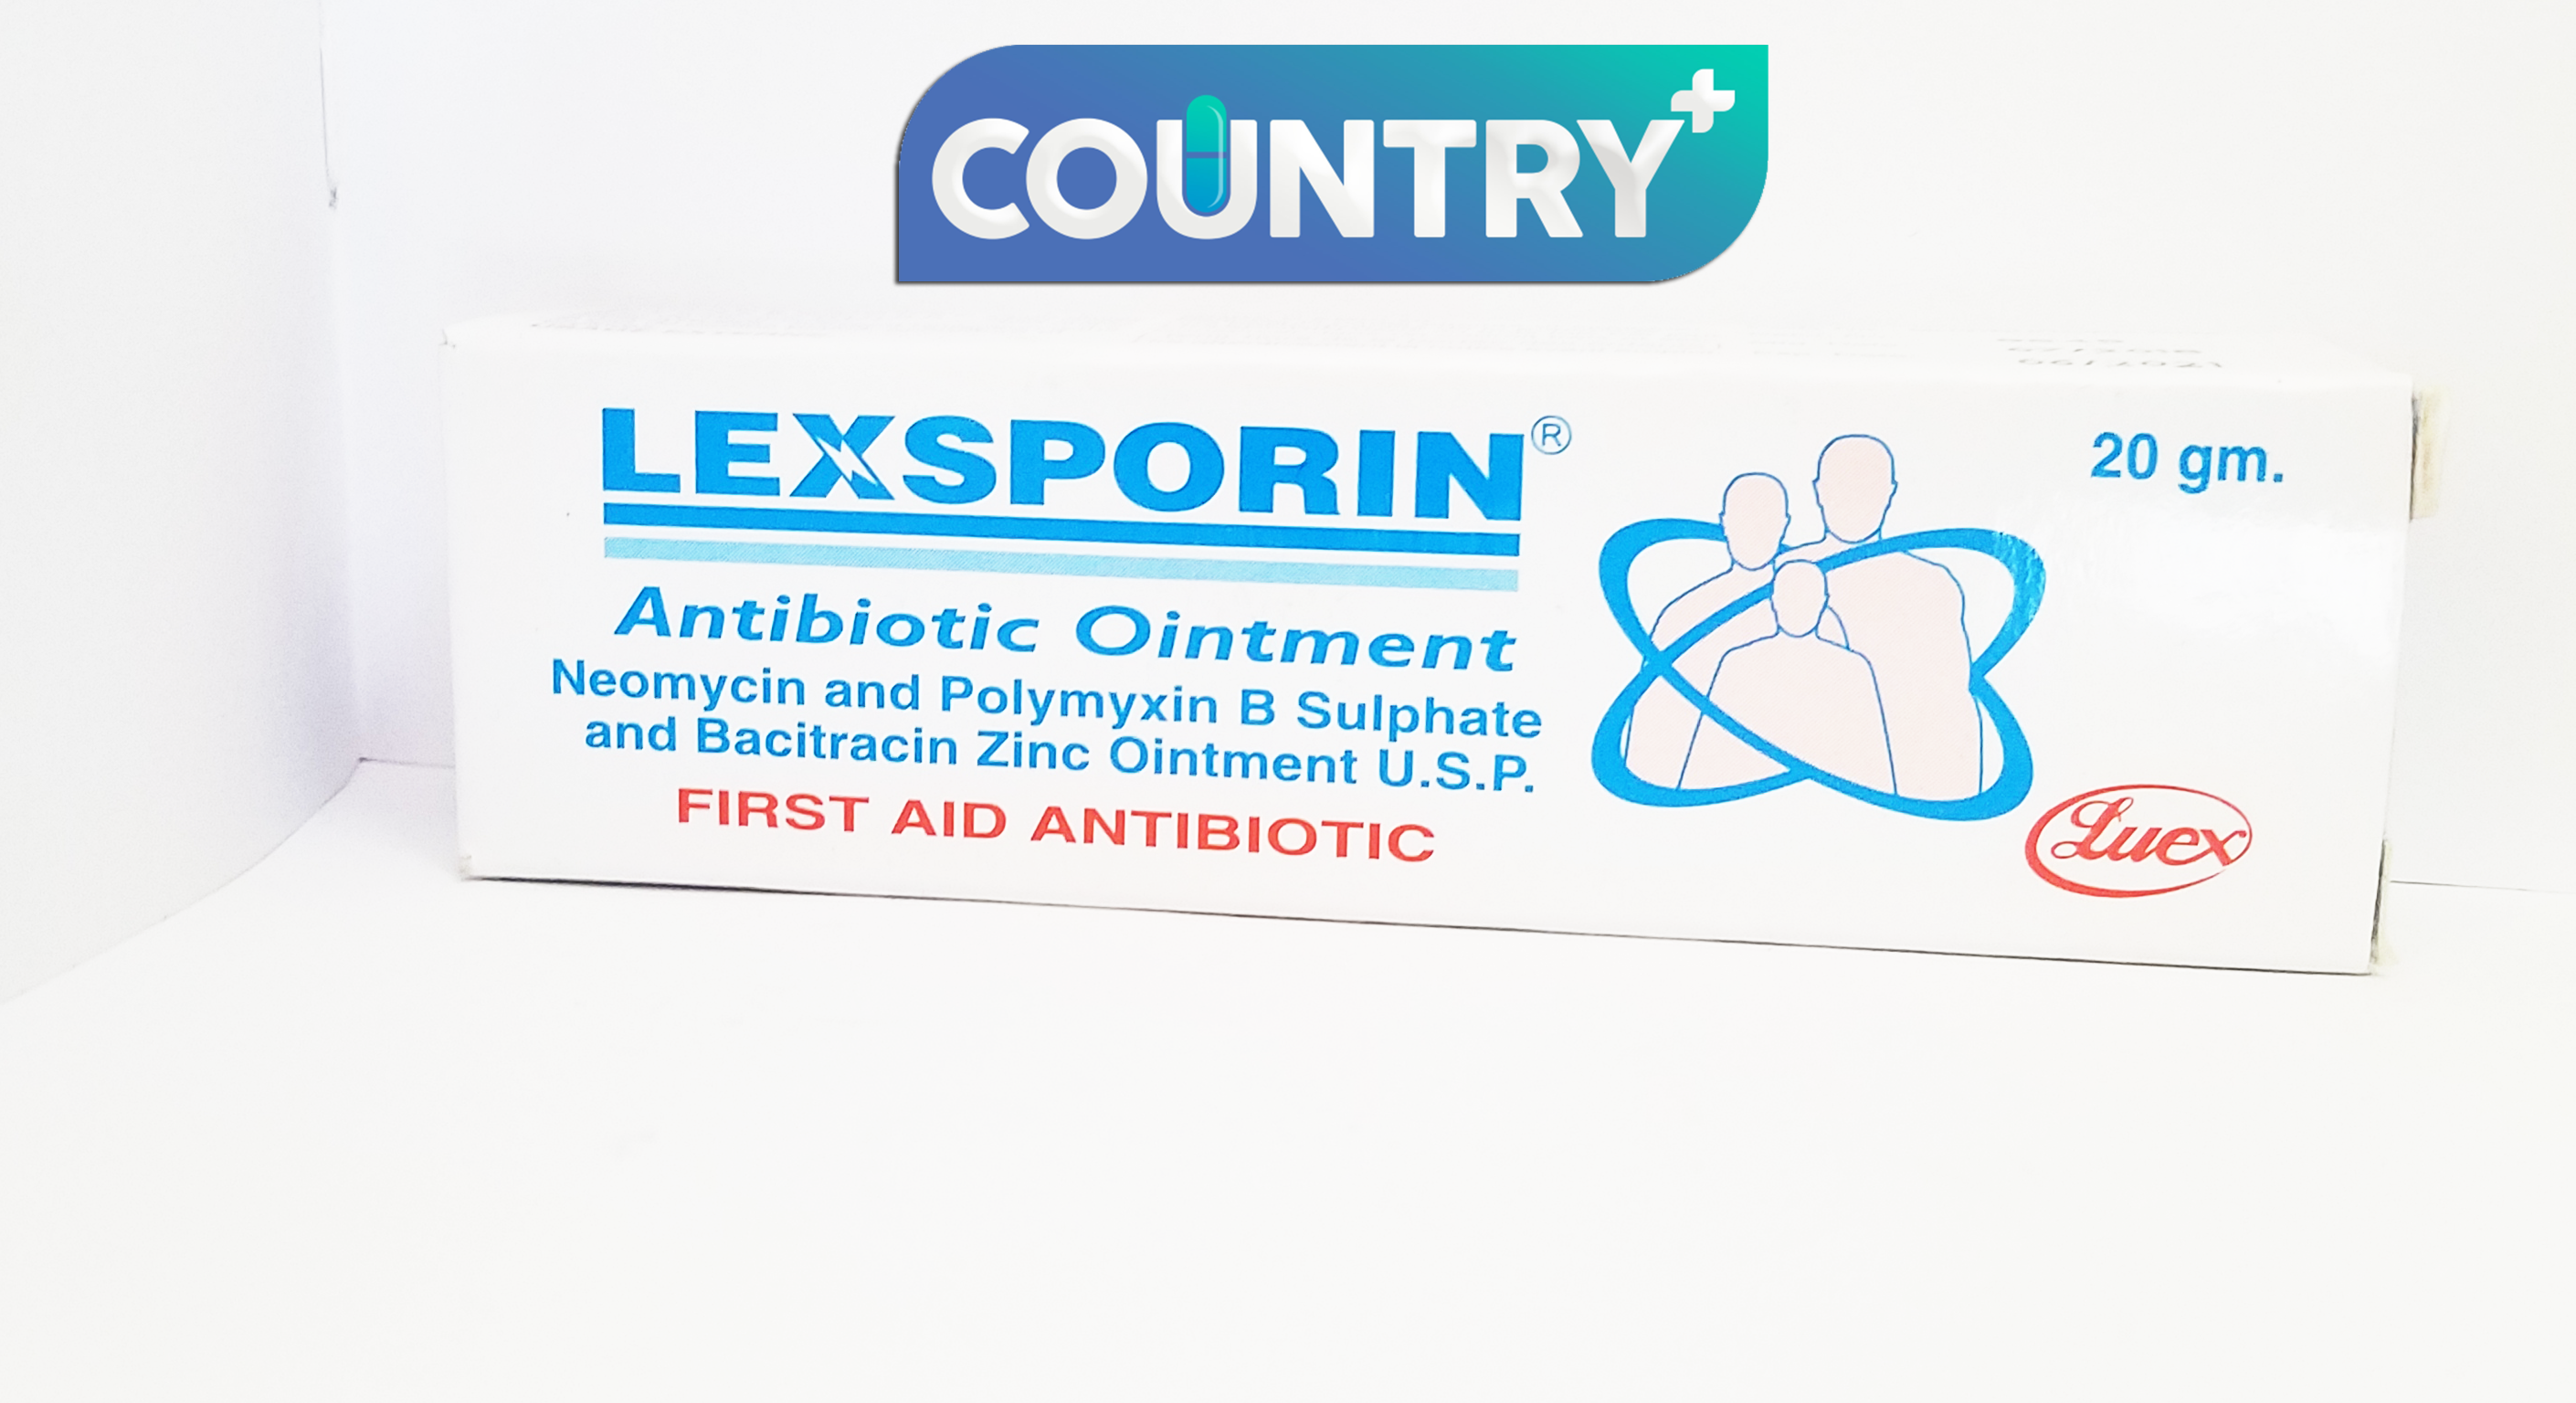 Lexsporin Ointment Topical is used for Skin infections, Eye infections, Wound infections, Minor cuts, Scrapes, Burns, Microbial infections, Bacterial skin infections and other conditions. Lexsporin Ointment Topical may also be used for purposes not listed in this medication guide.